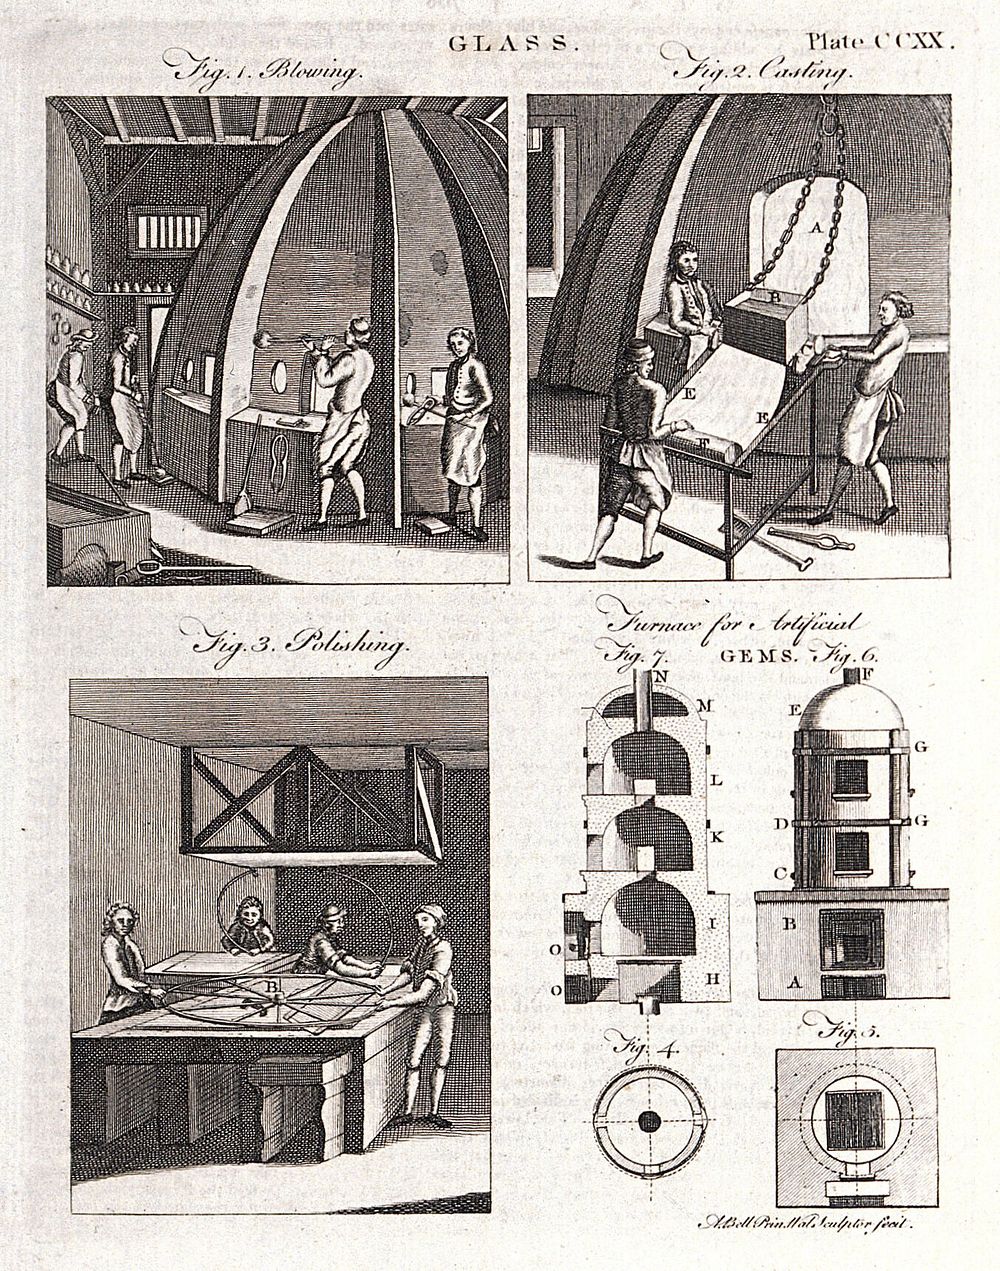 Glass: three views inside a plate glass factory. Engraving by A. Bell.